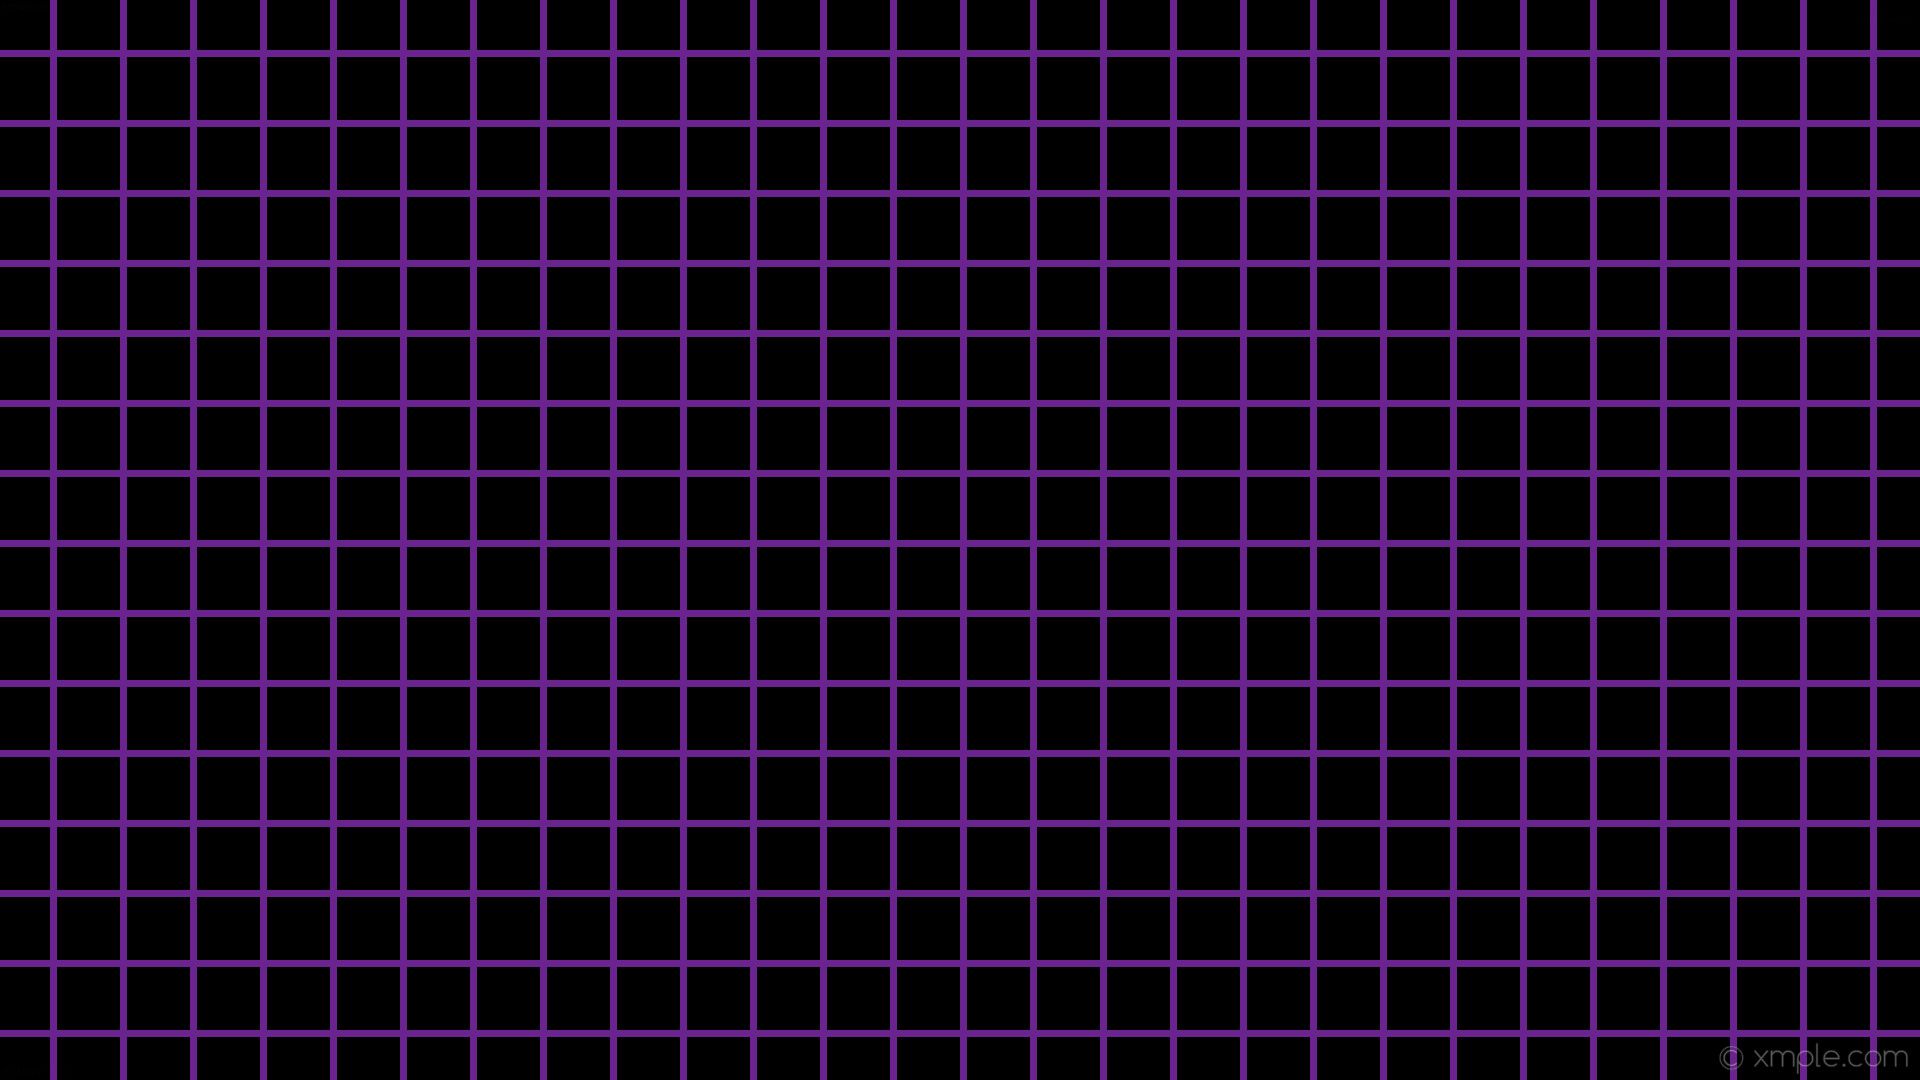 Black and Purple Aesthetic Wallpaper Free Black and Purple Aesthetic Background